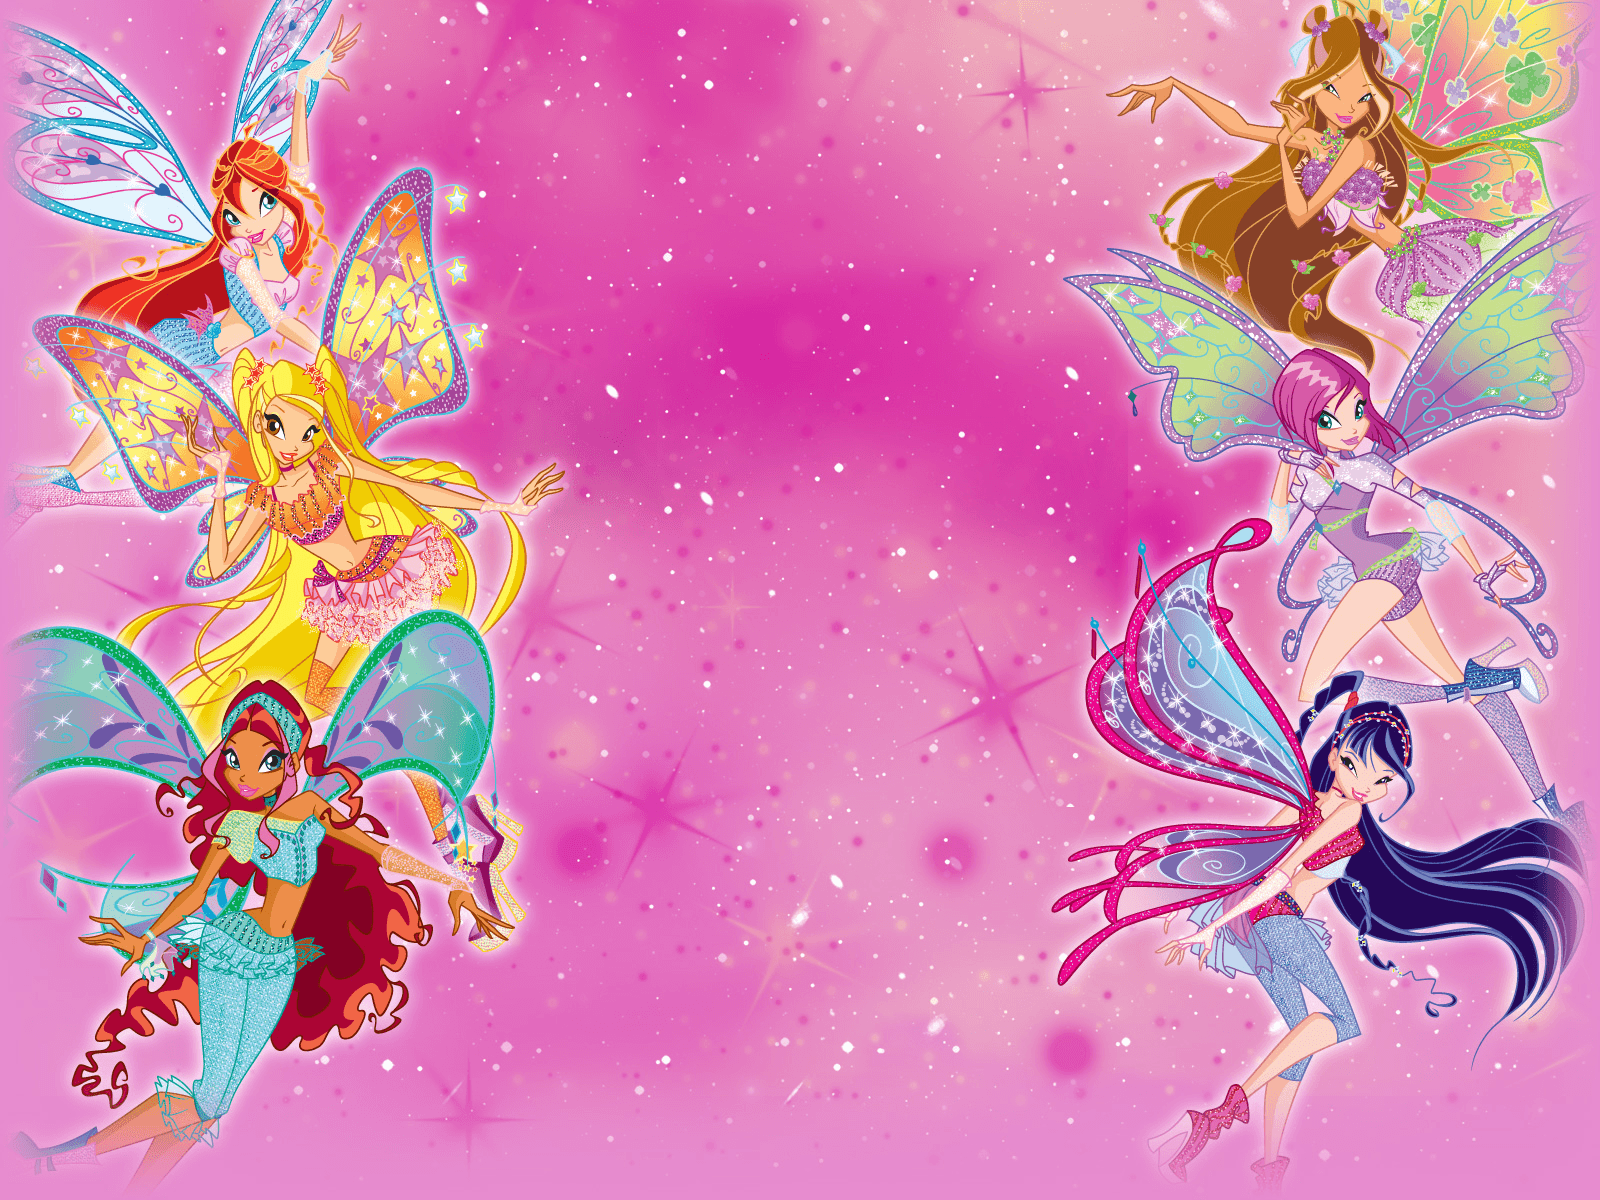 Wallpaper of Winx club Believix for fans of The Winx Club Fairies